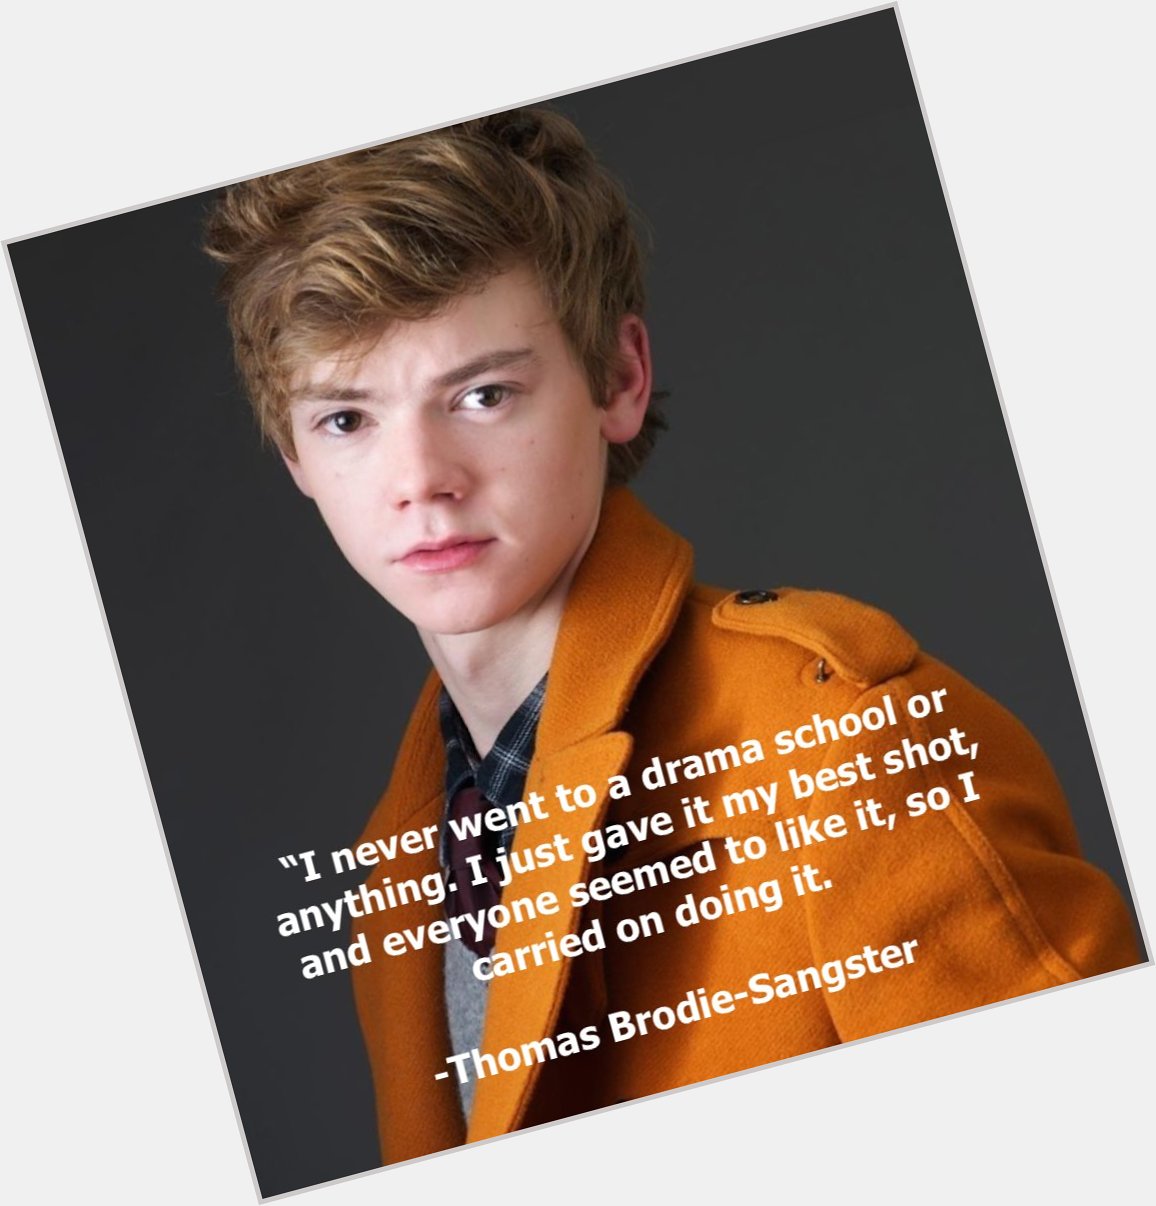 Every Actor has their own path! Happy birthday Thomas Brodie-Sangster from Cast It Talent!  